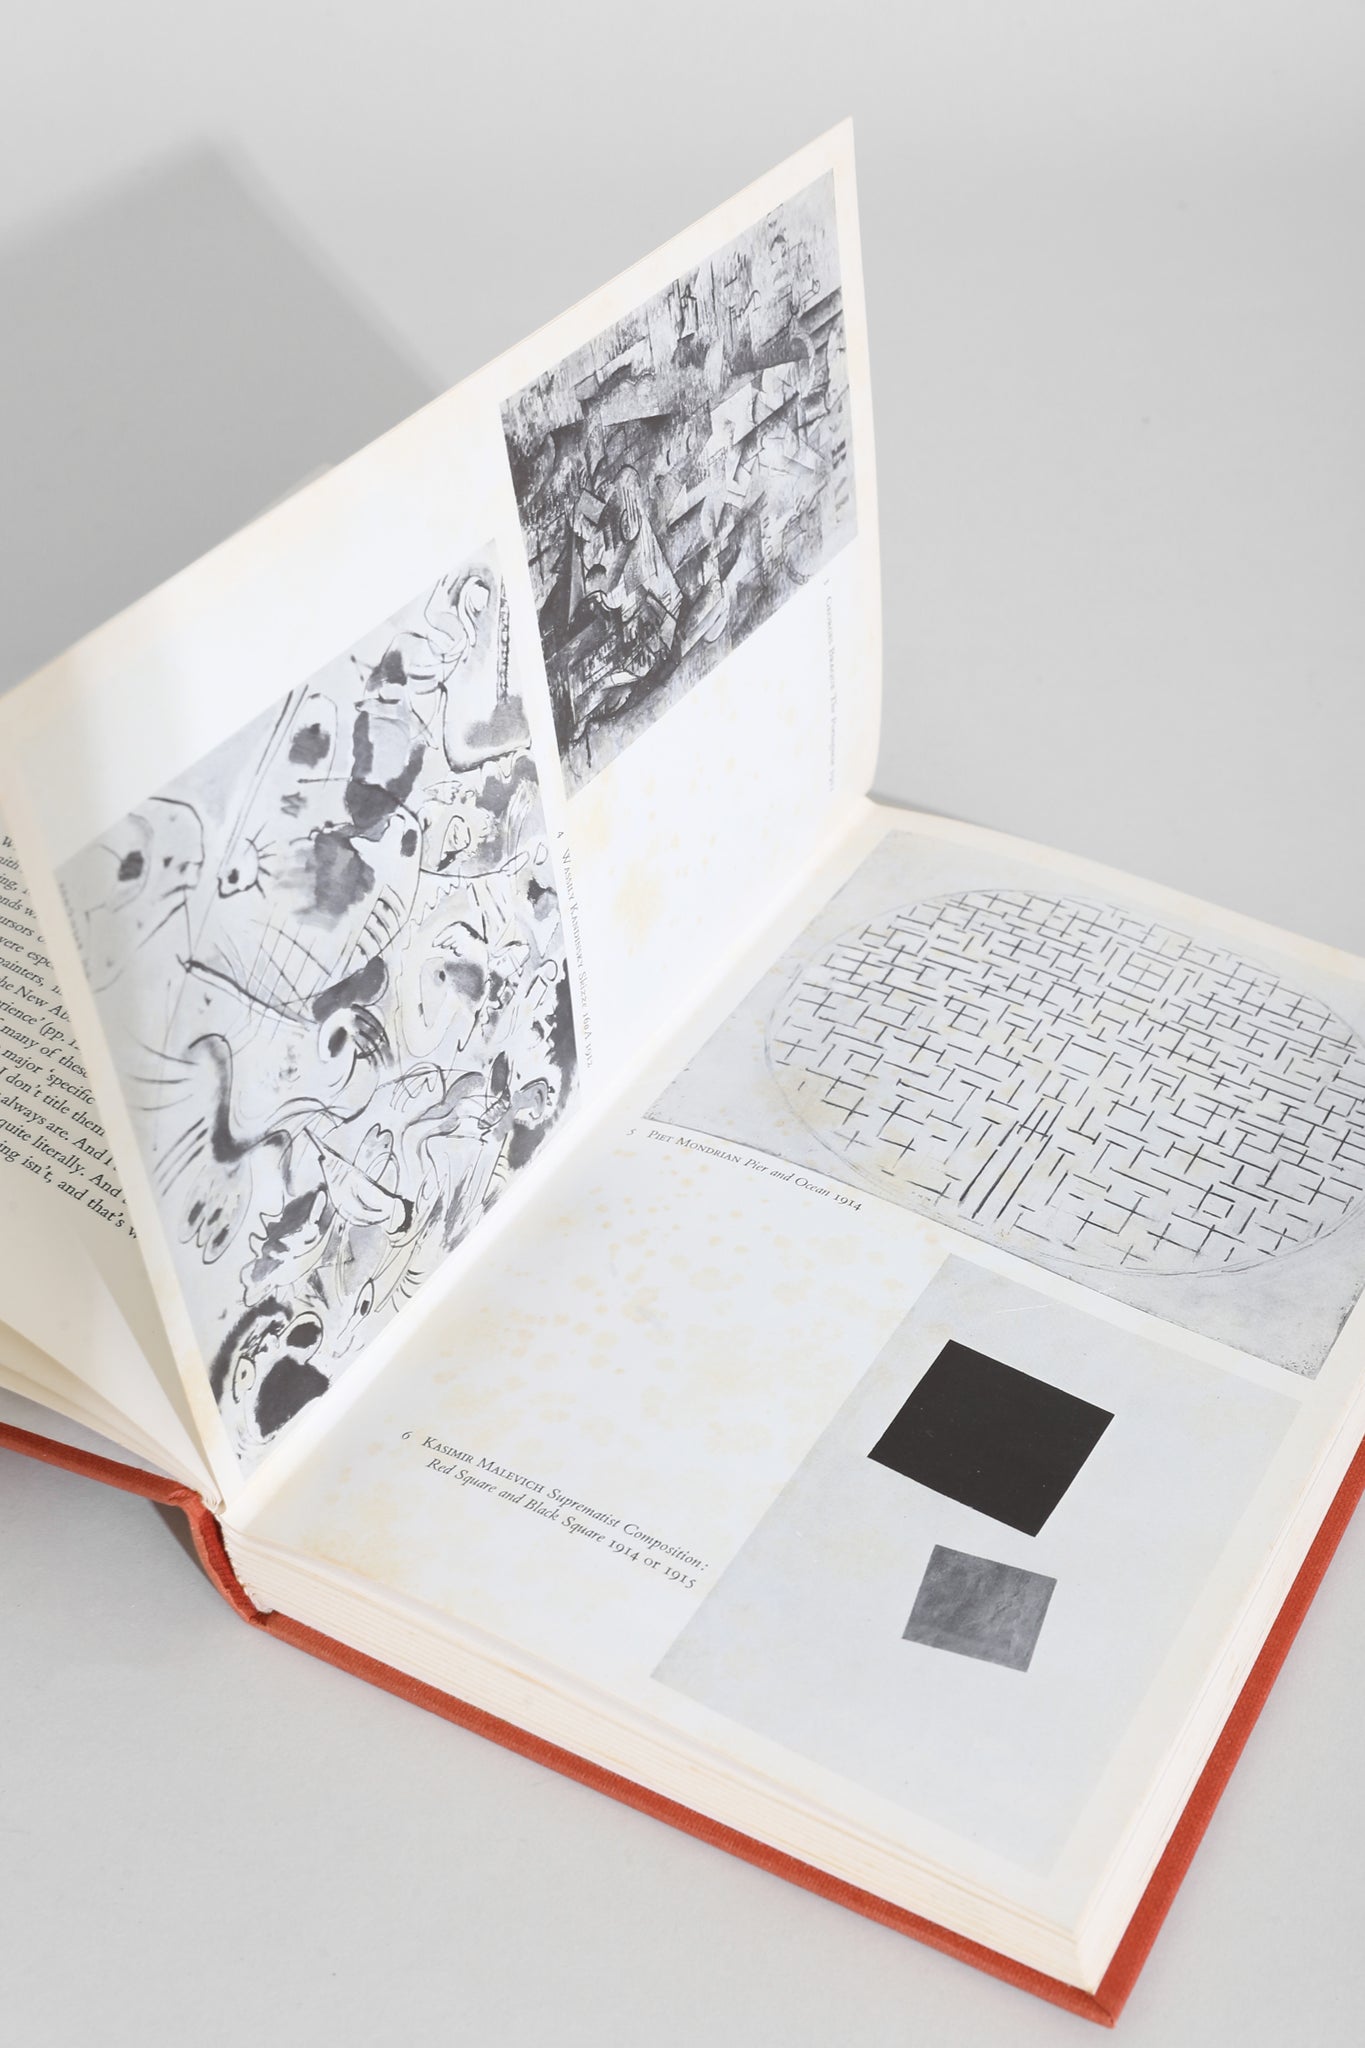 Modern Art and the Object Book